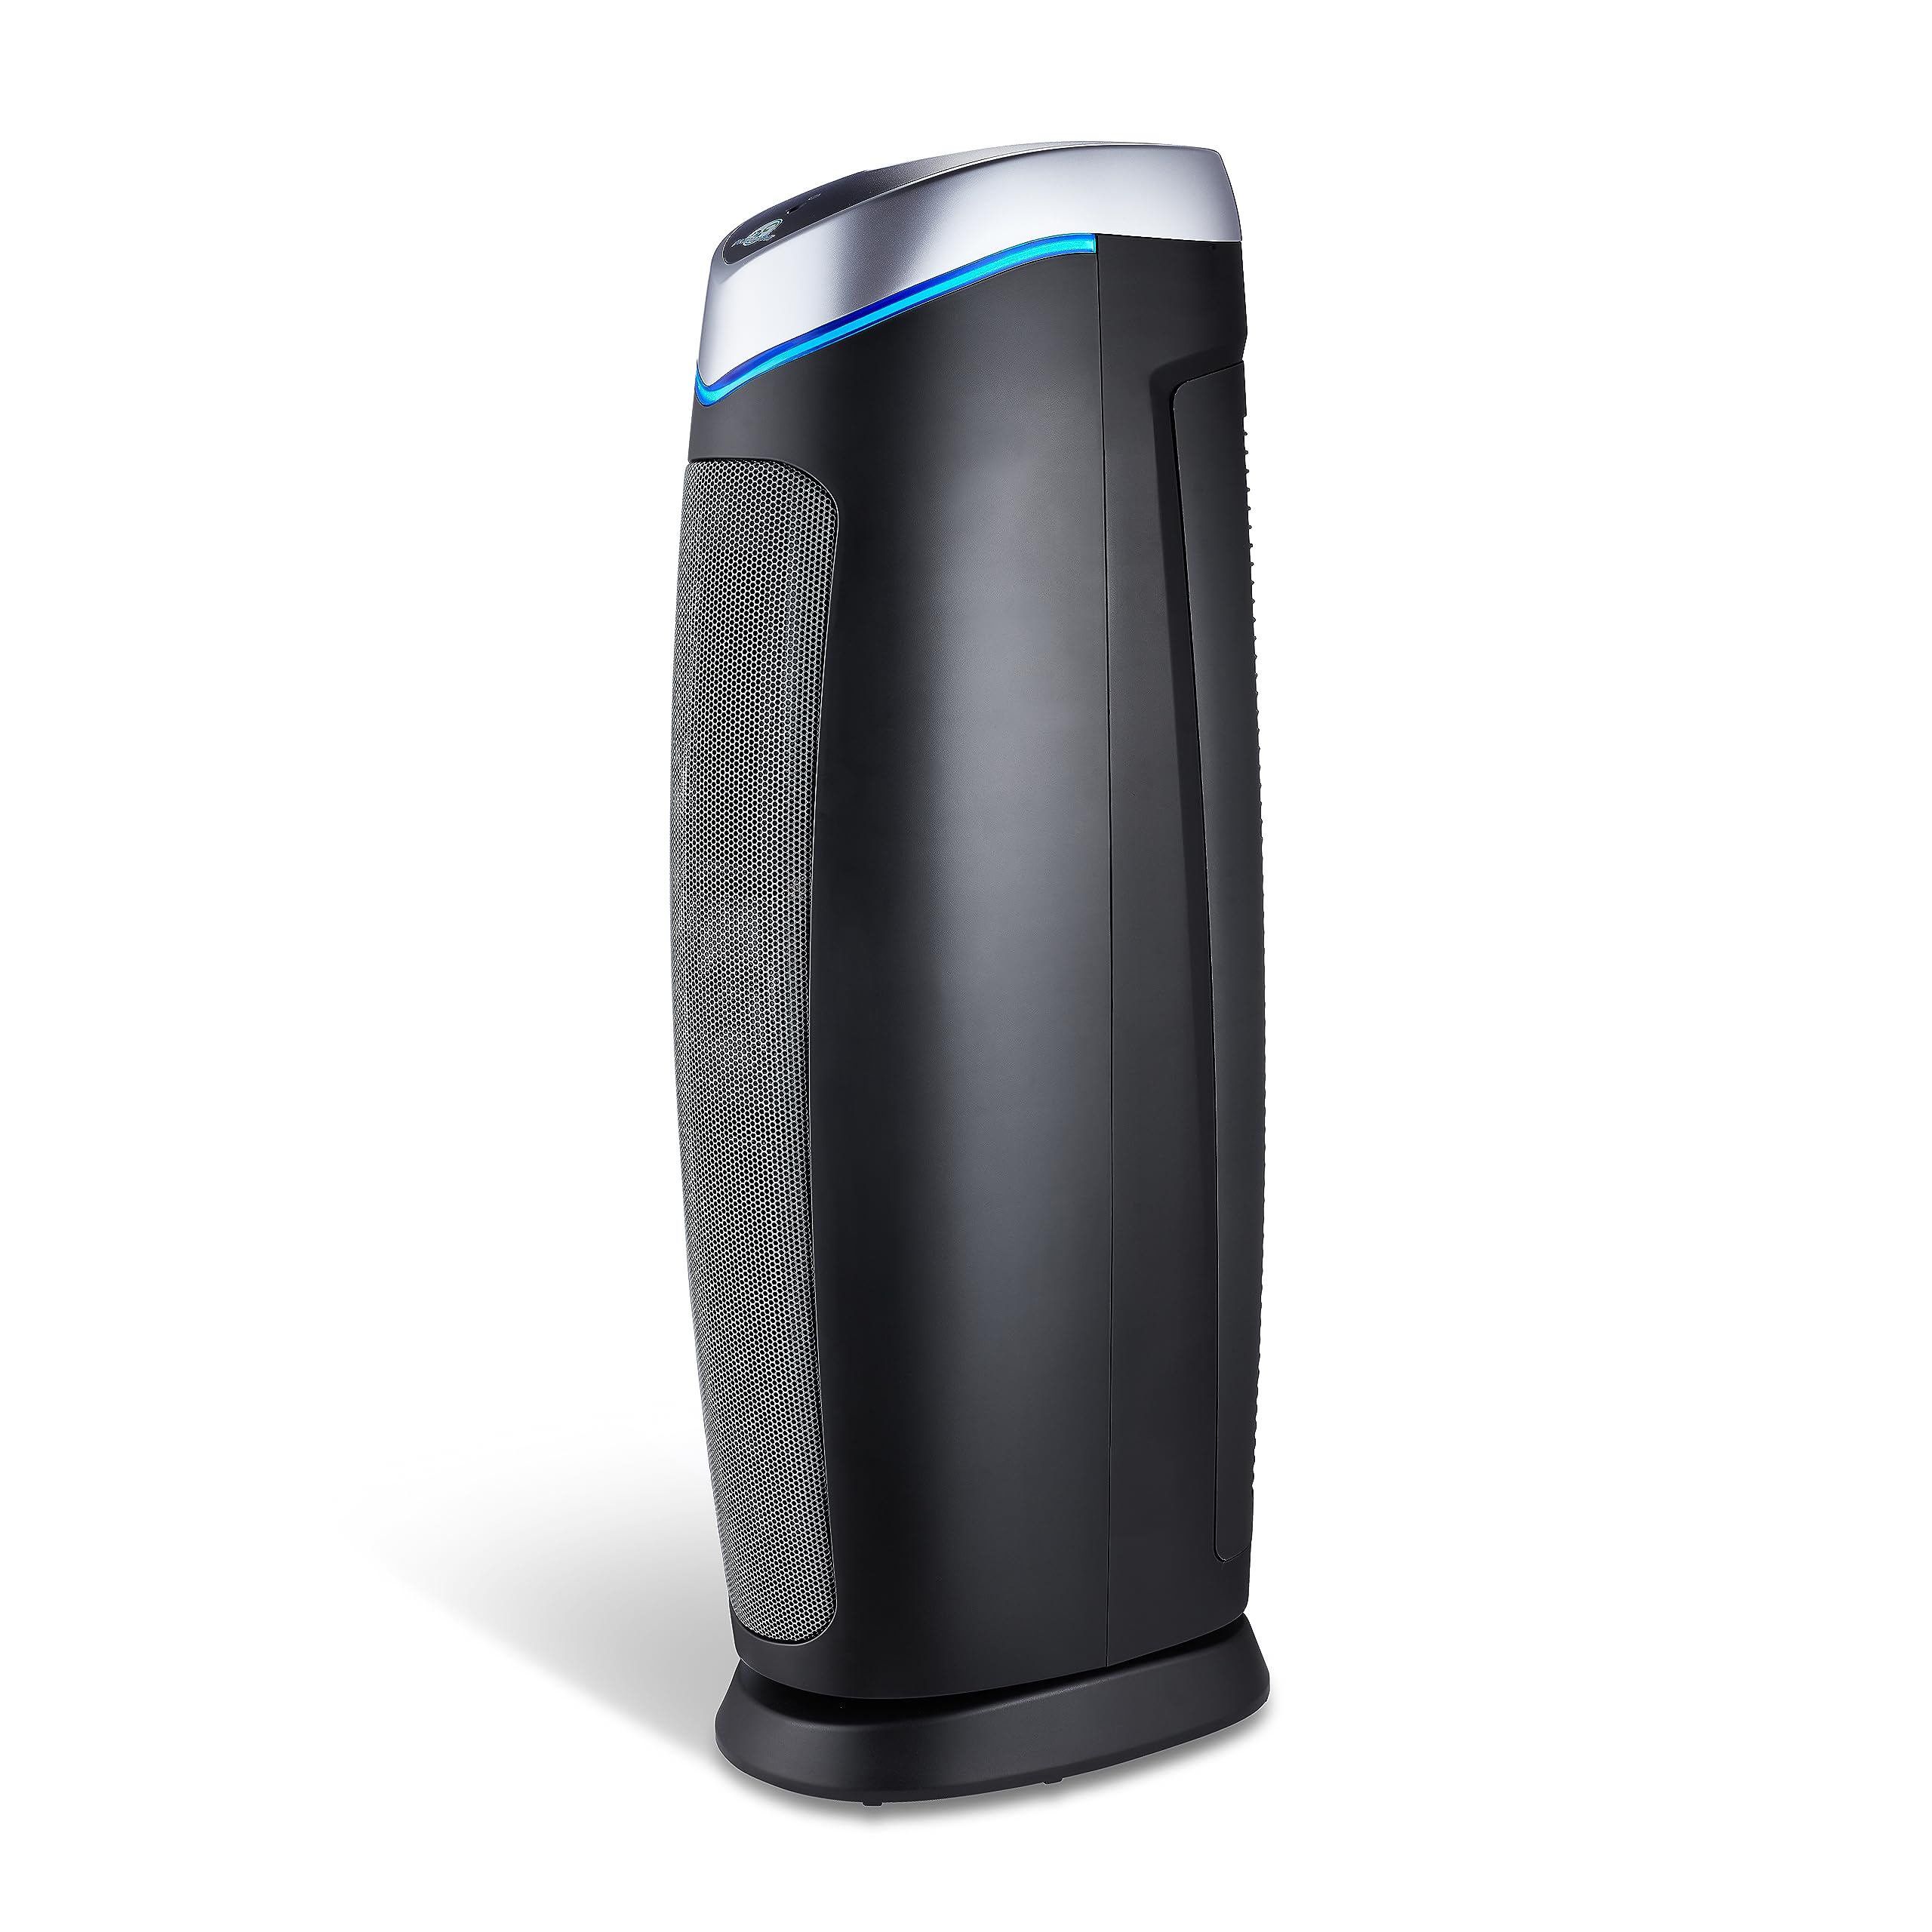 Germ Guardian Air Purifier with HEPA 13 Pet Filter, Removes 99.97% of Pollutants, Covers Large Room up to 915 Sq. Foot in 1 Hr, UV-C Light Helps Reduce Germs, Zero Ozone Verified, 28